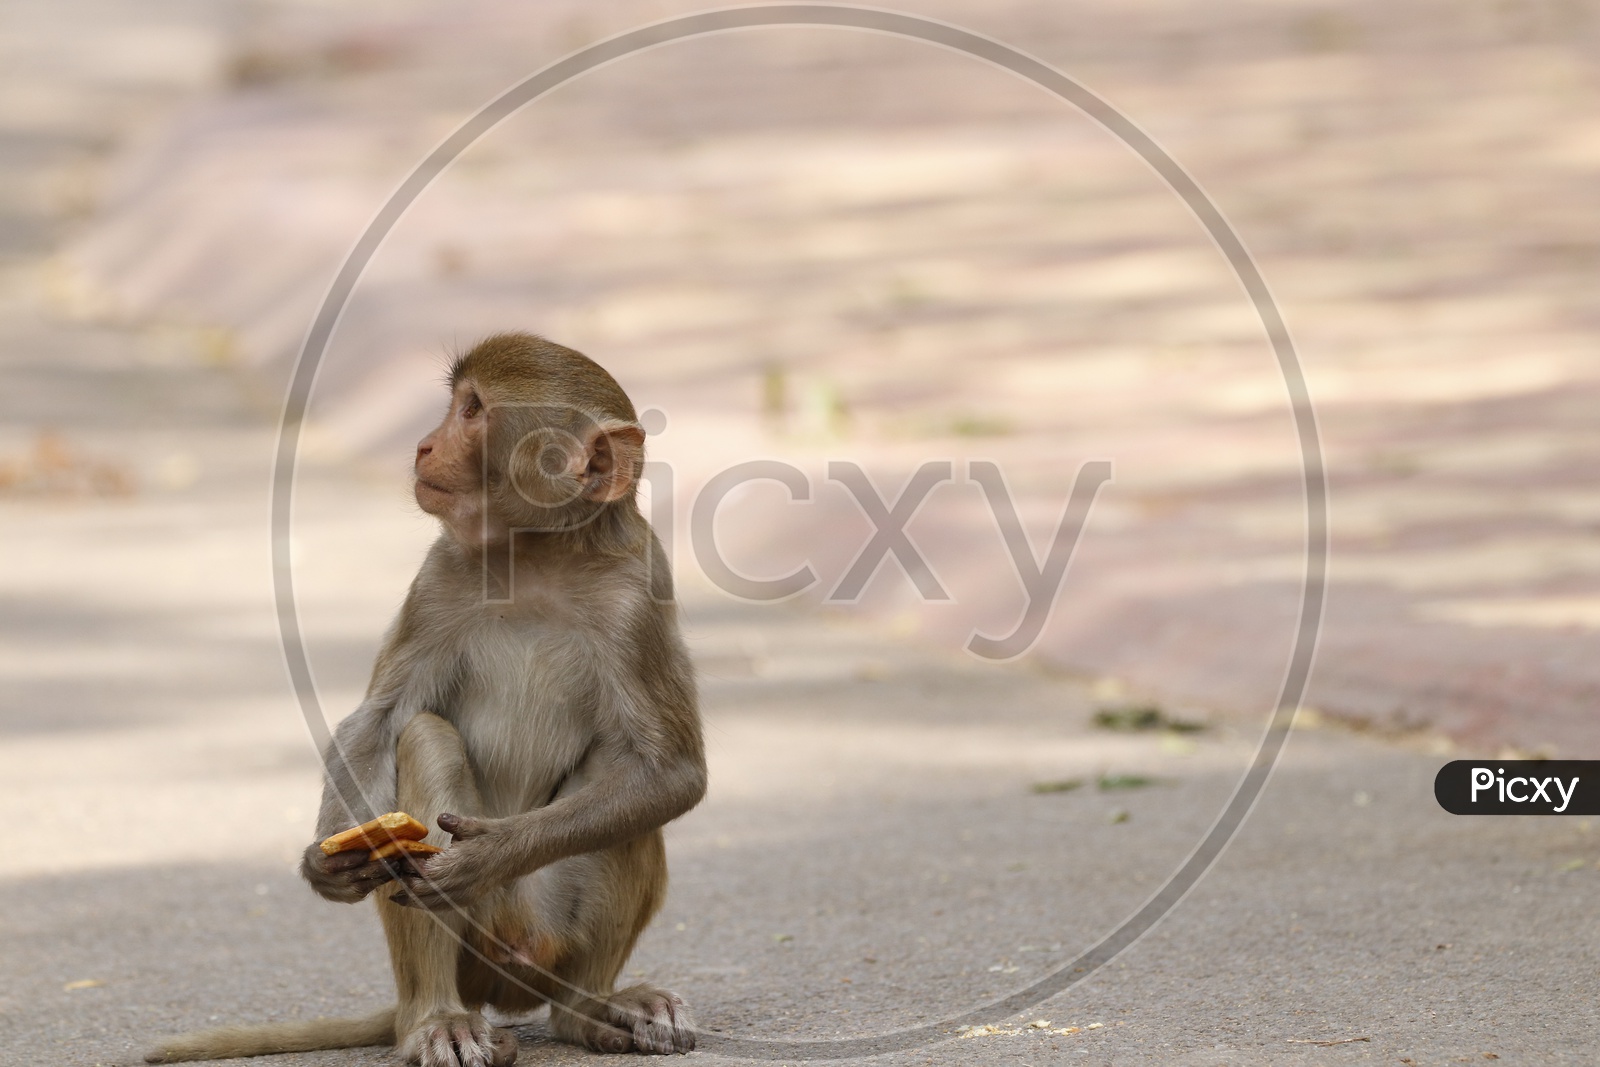 A monkey holding a biscuit